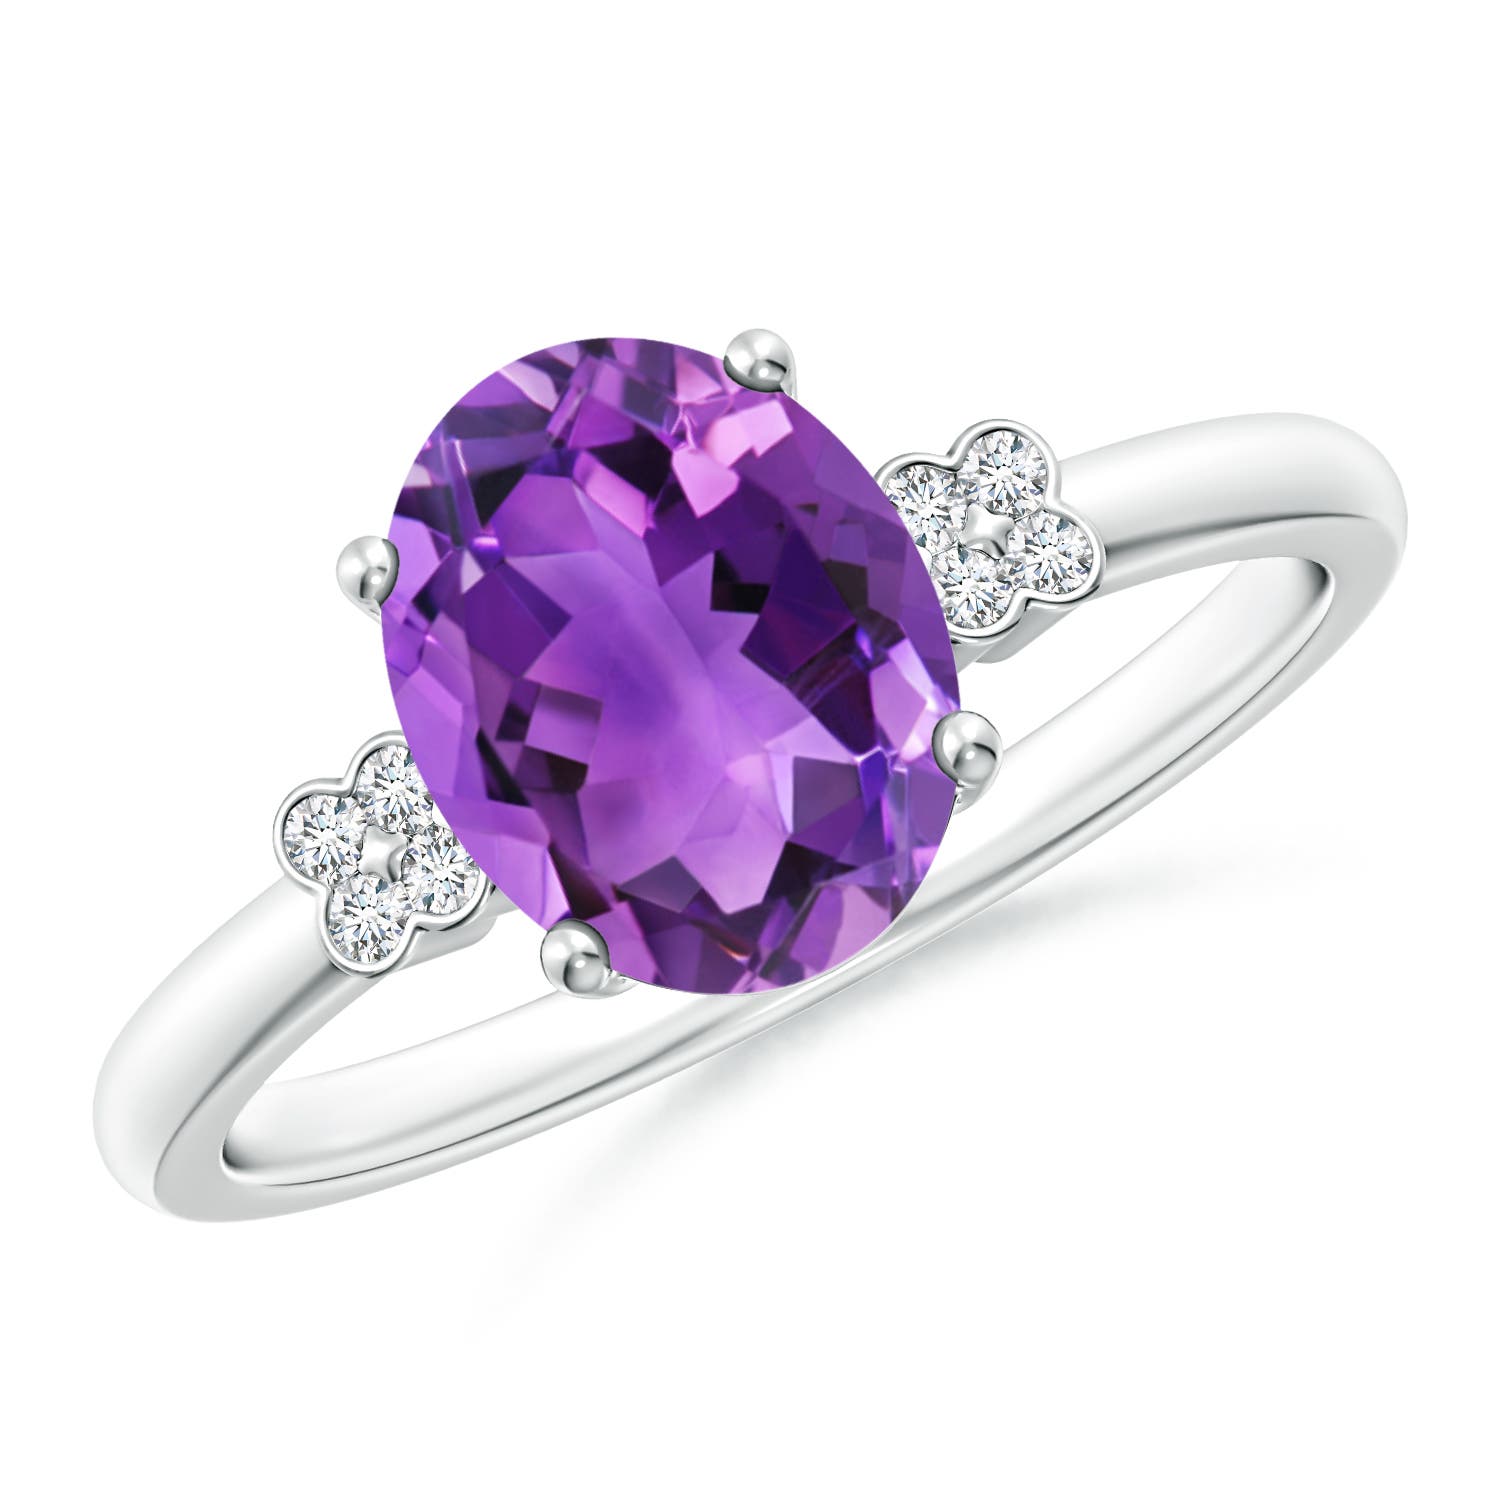 AAA- Amethyst / 1.66 CT / 14 KT White Gold